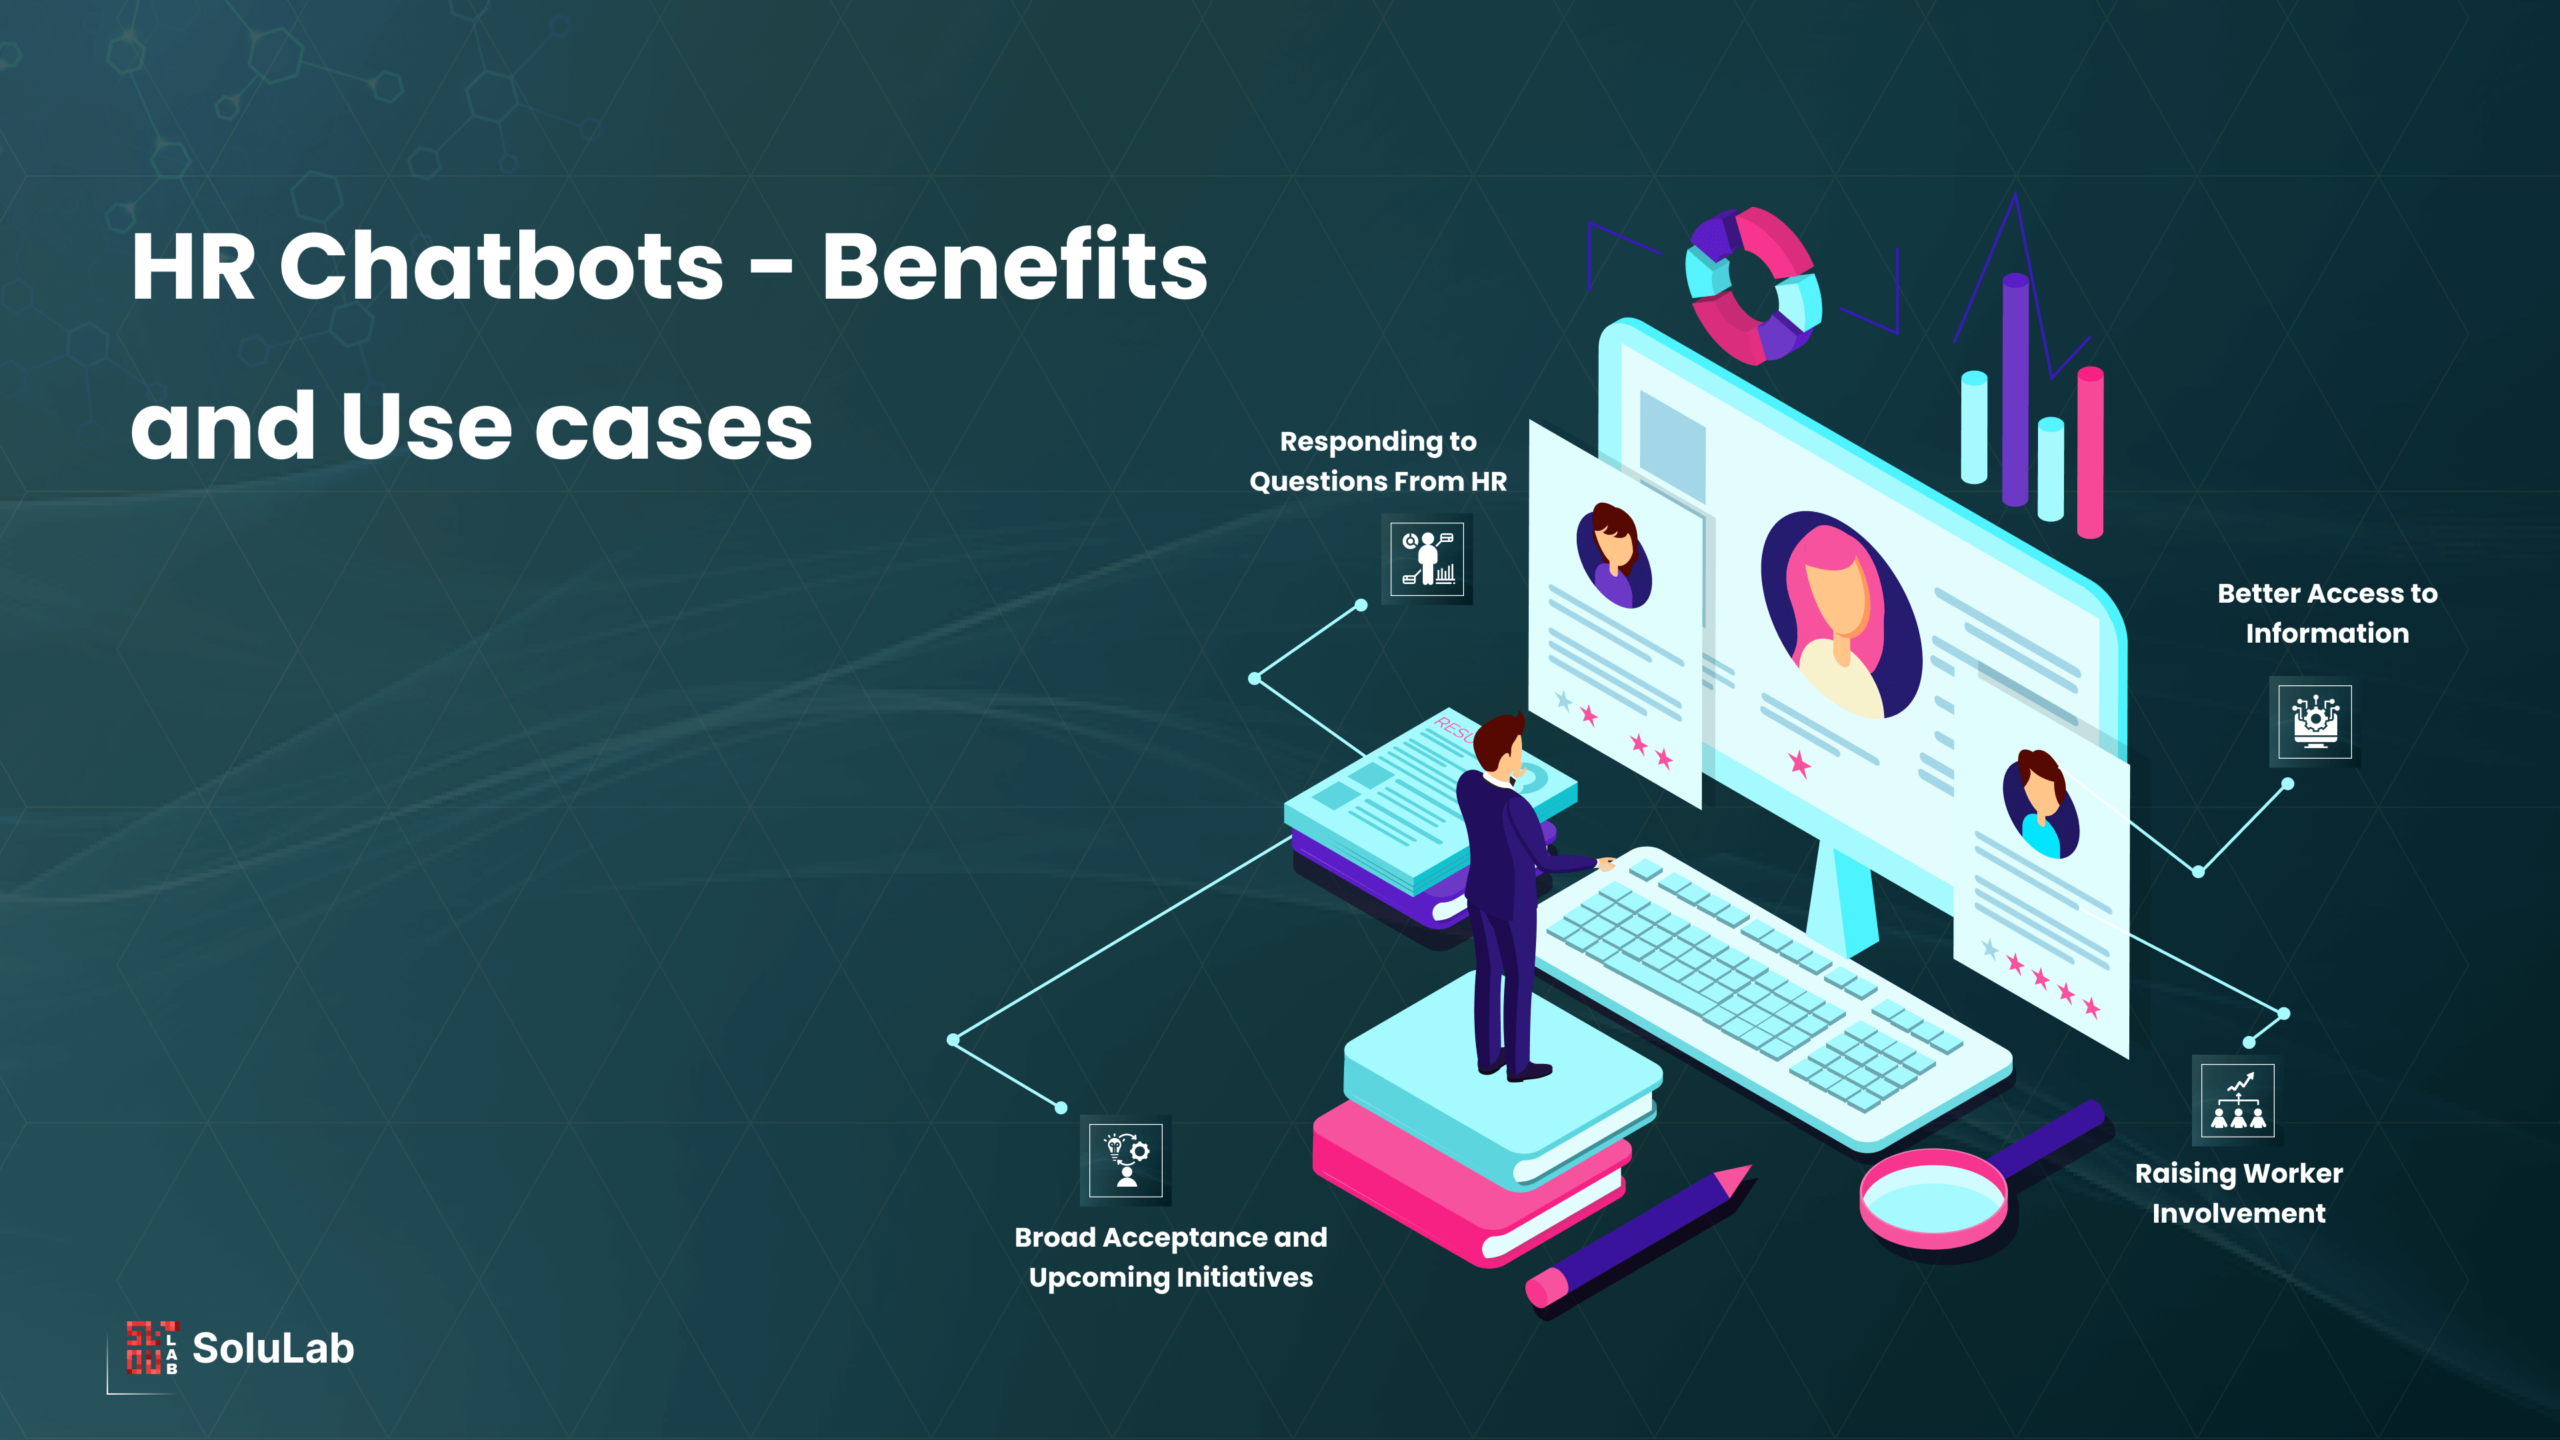 HR Chatbots - Benefits and Use cases 